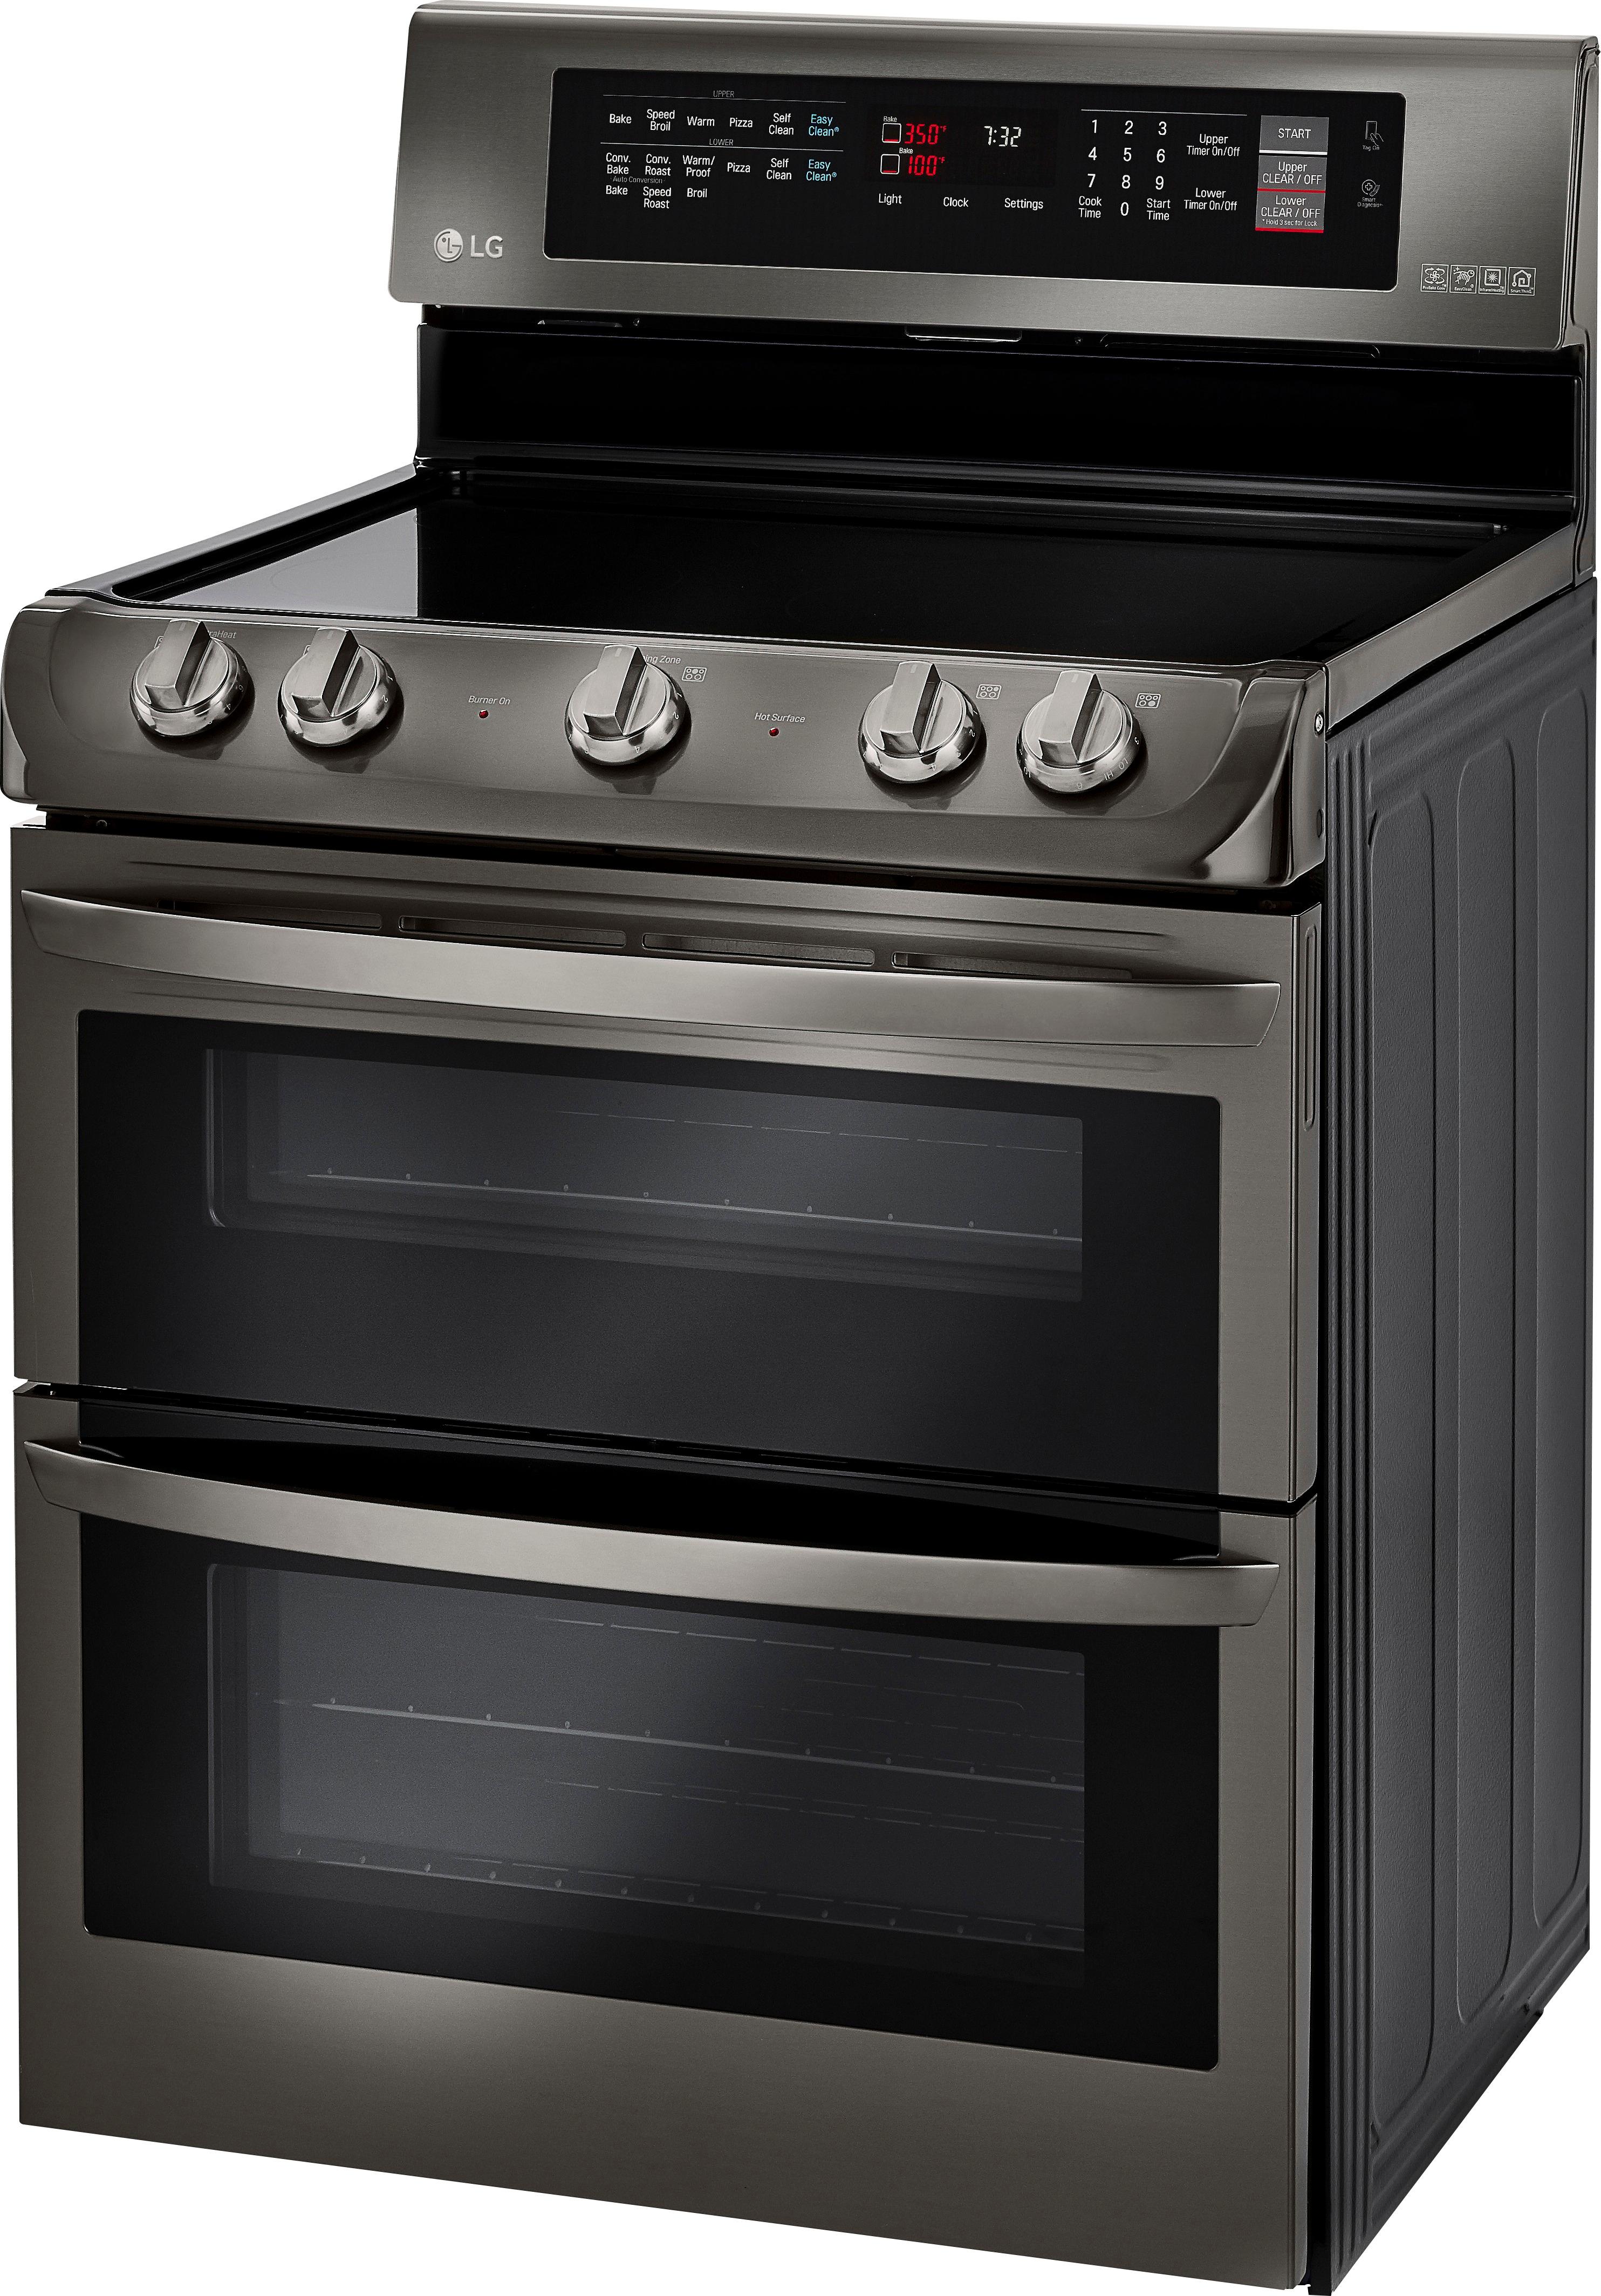 LG 7.3 Cu. Ft. Self-Cleaning Freestanding Double Oven Electric Range Black Stainless Steel Electric Range